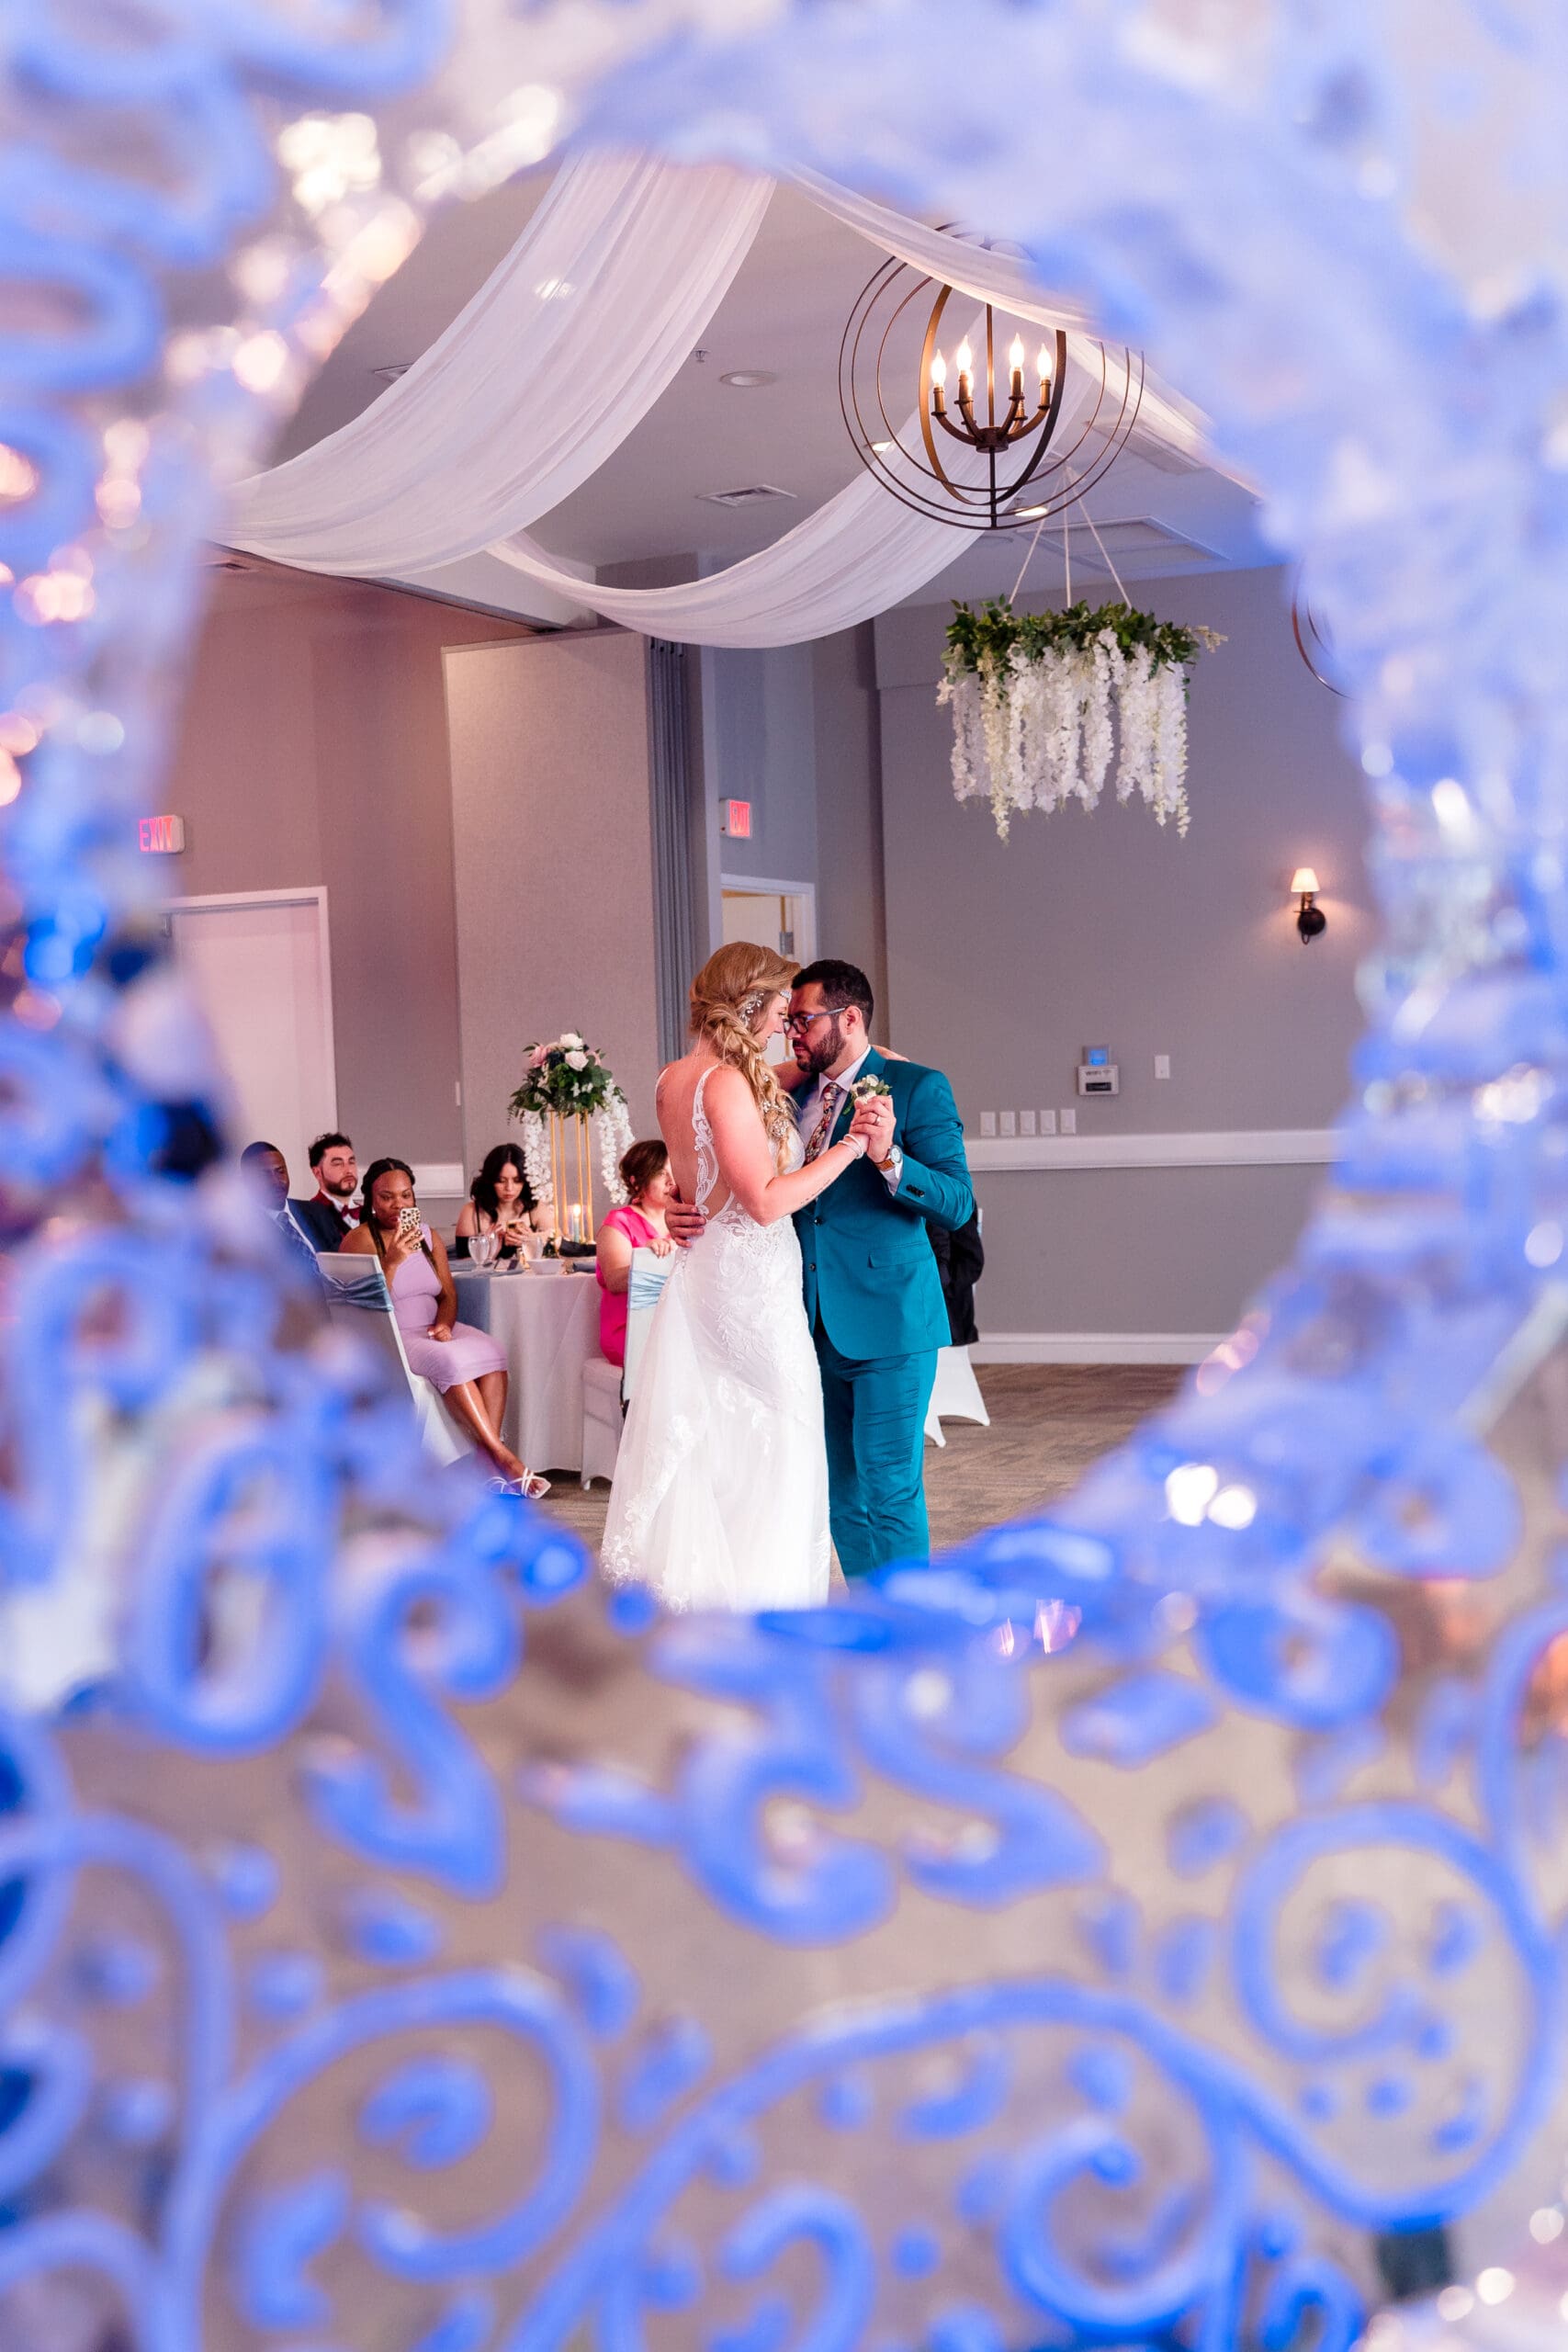 View of the couple's first dance through an ice circle decoration, framing the intimate moment.